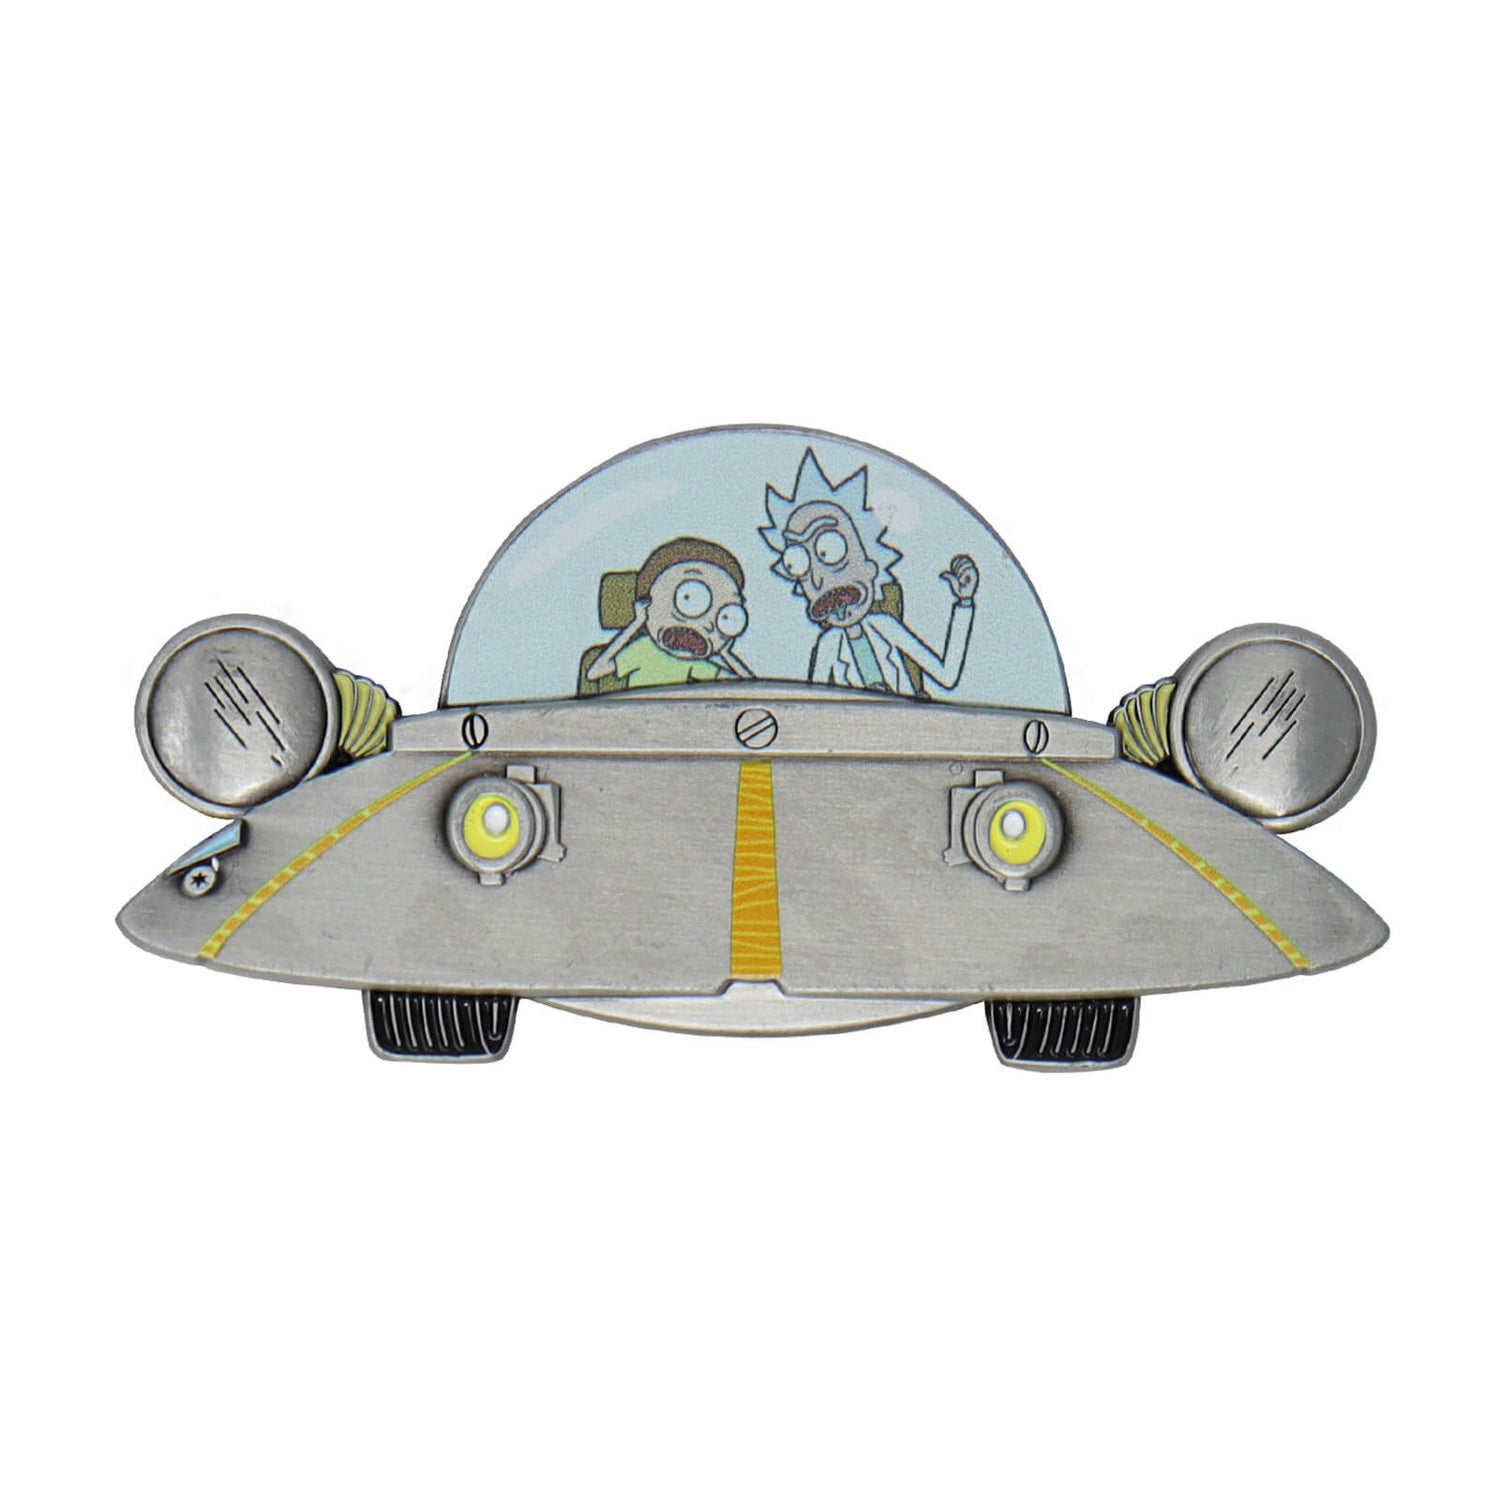 DUST! Rick and Morty Limited Edition Space Ship Medallion Merchandise -  Zavvi Ireland